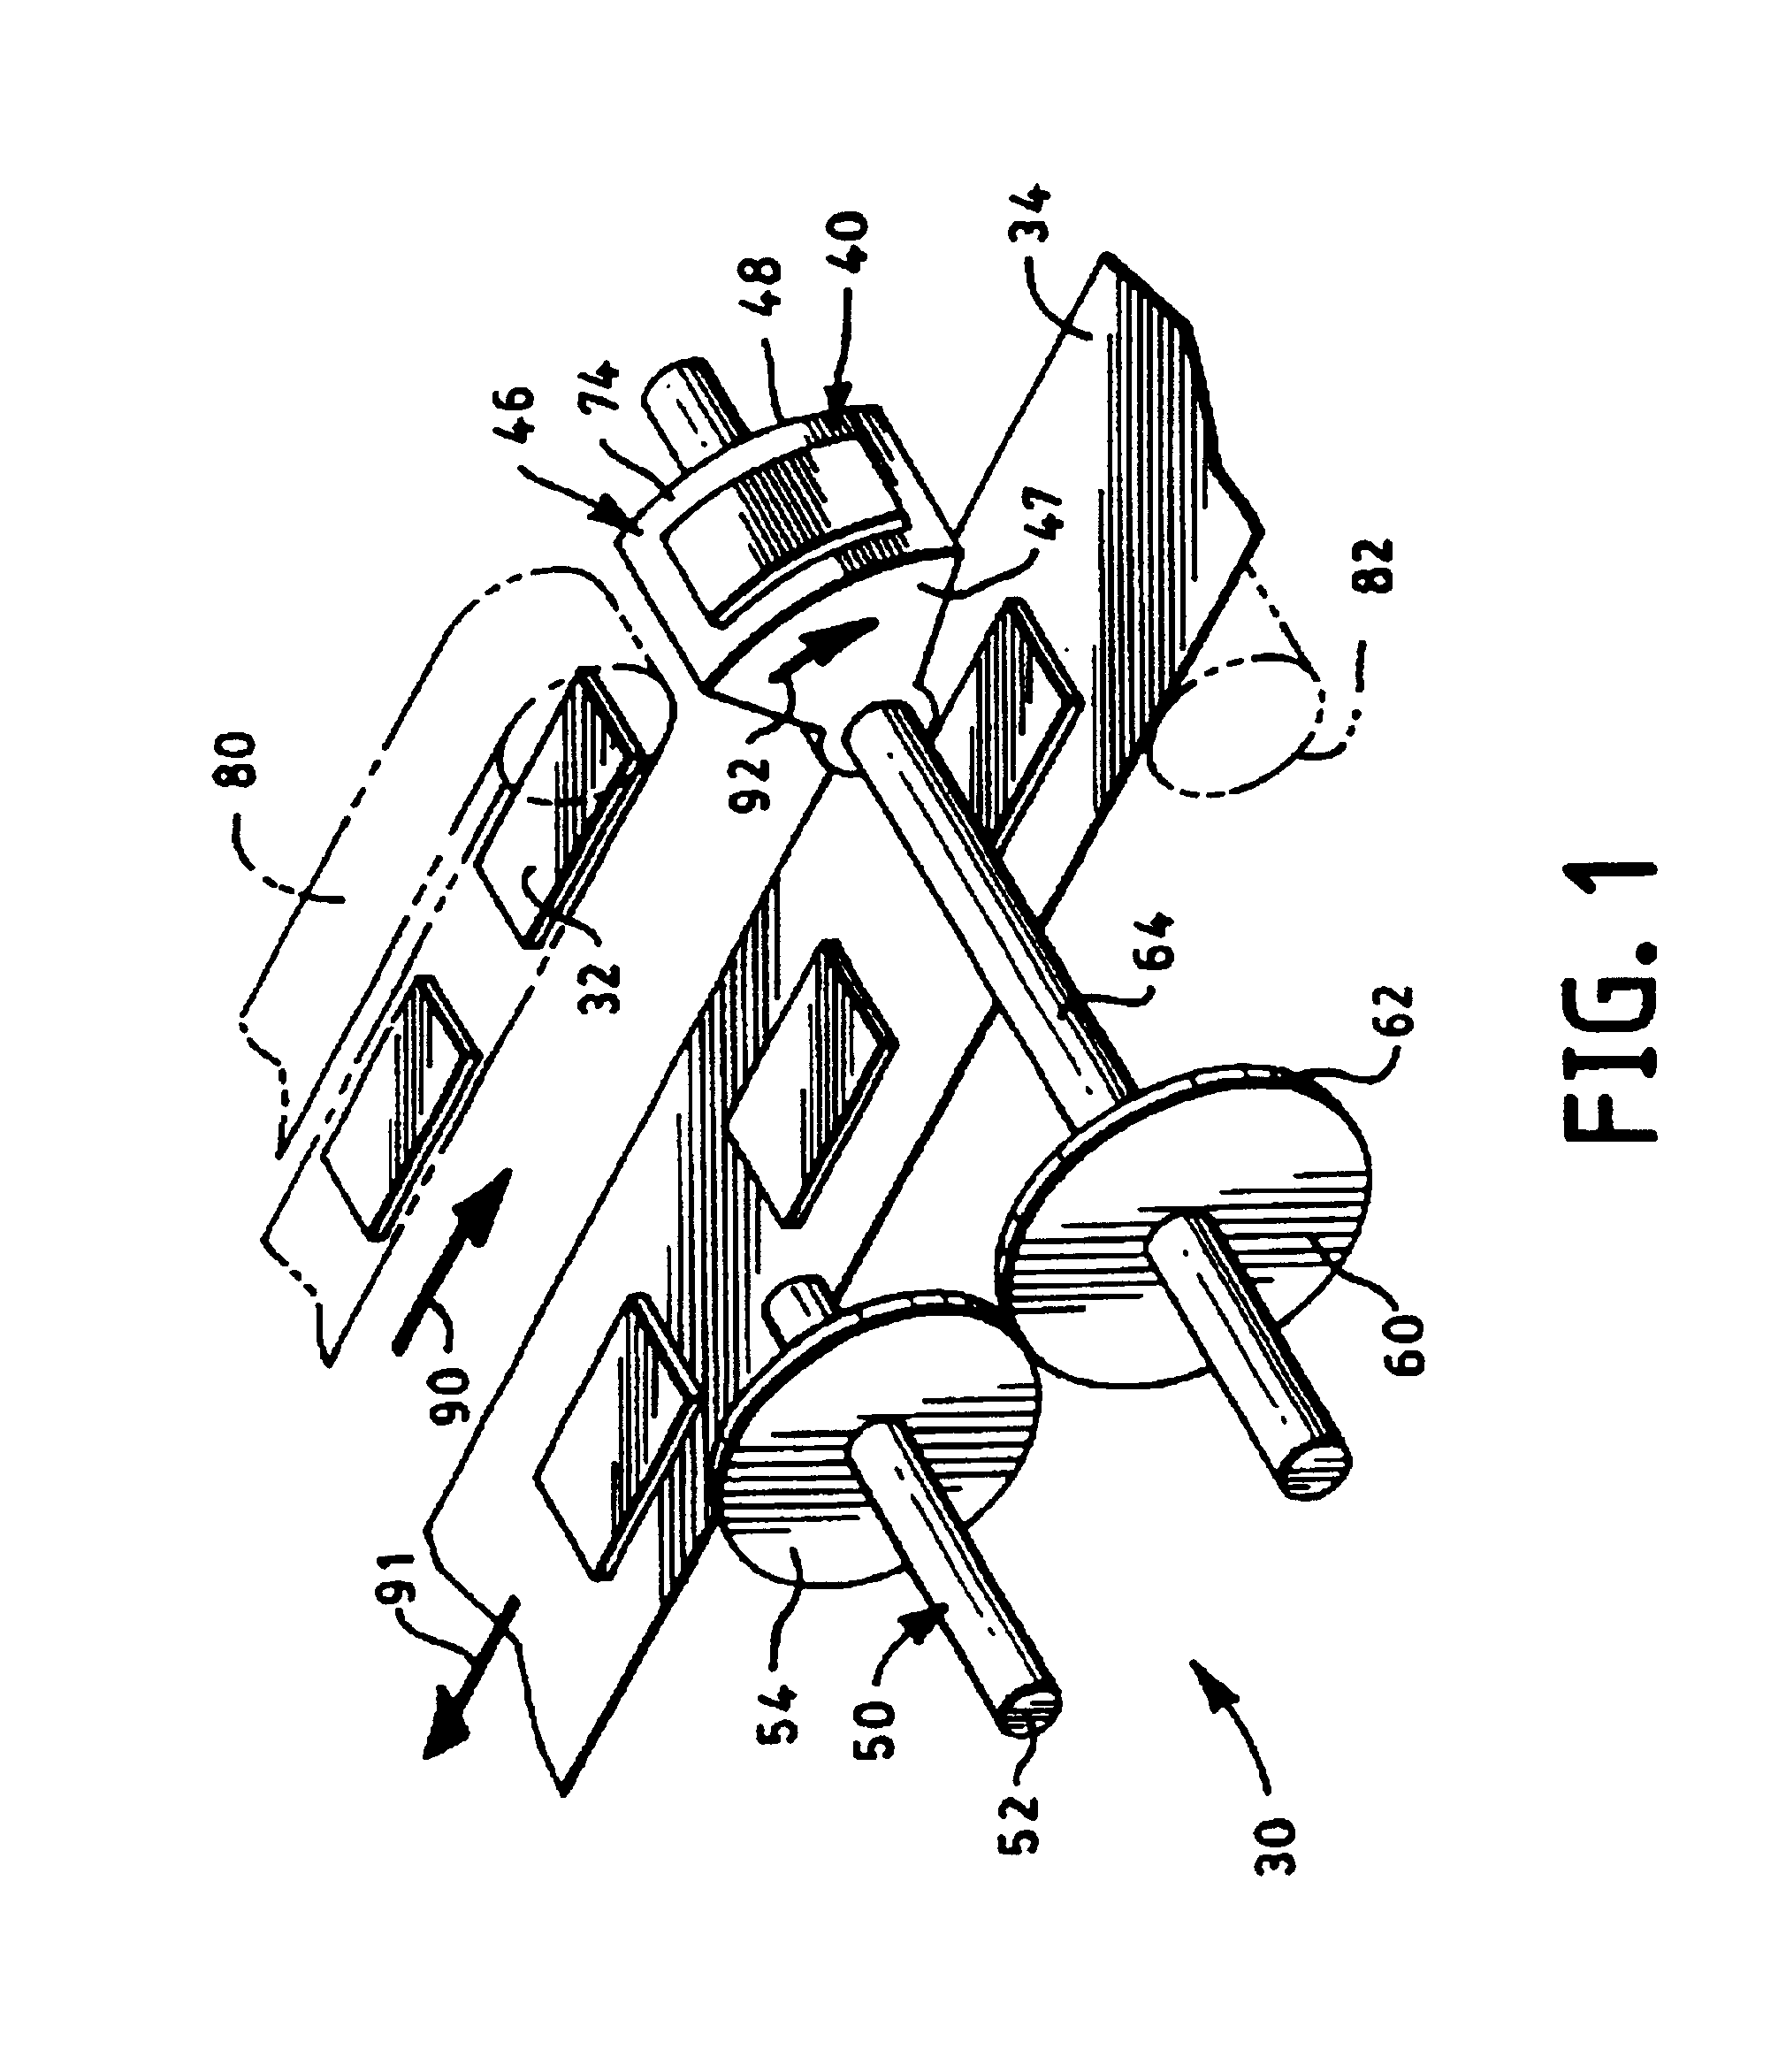 Method and apparatus for placing discrete parts transversely onto a moving web